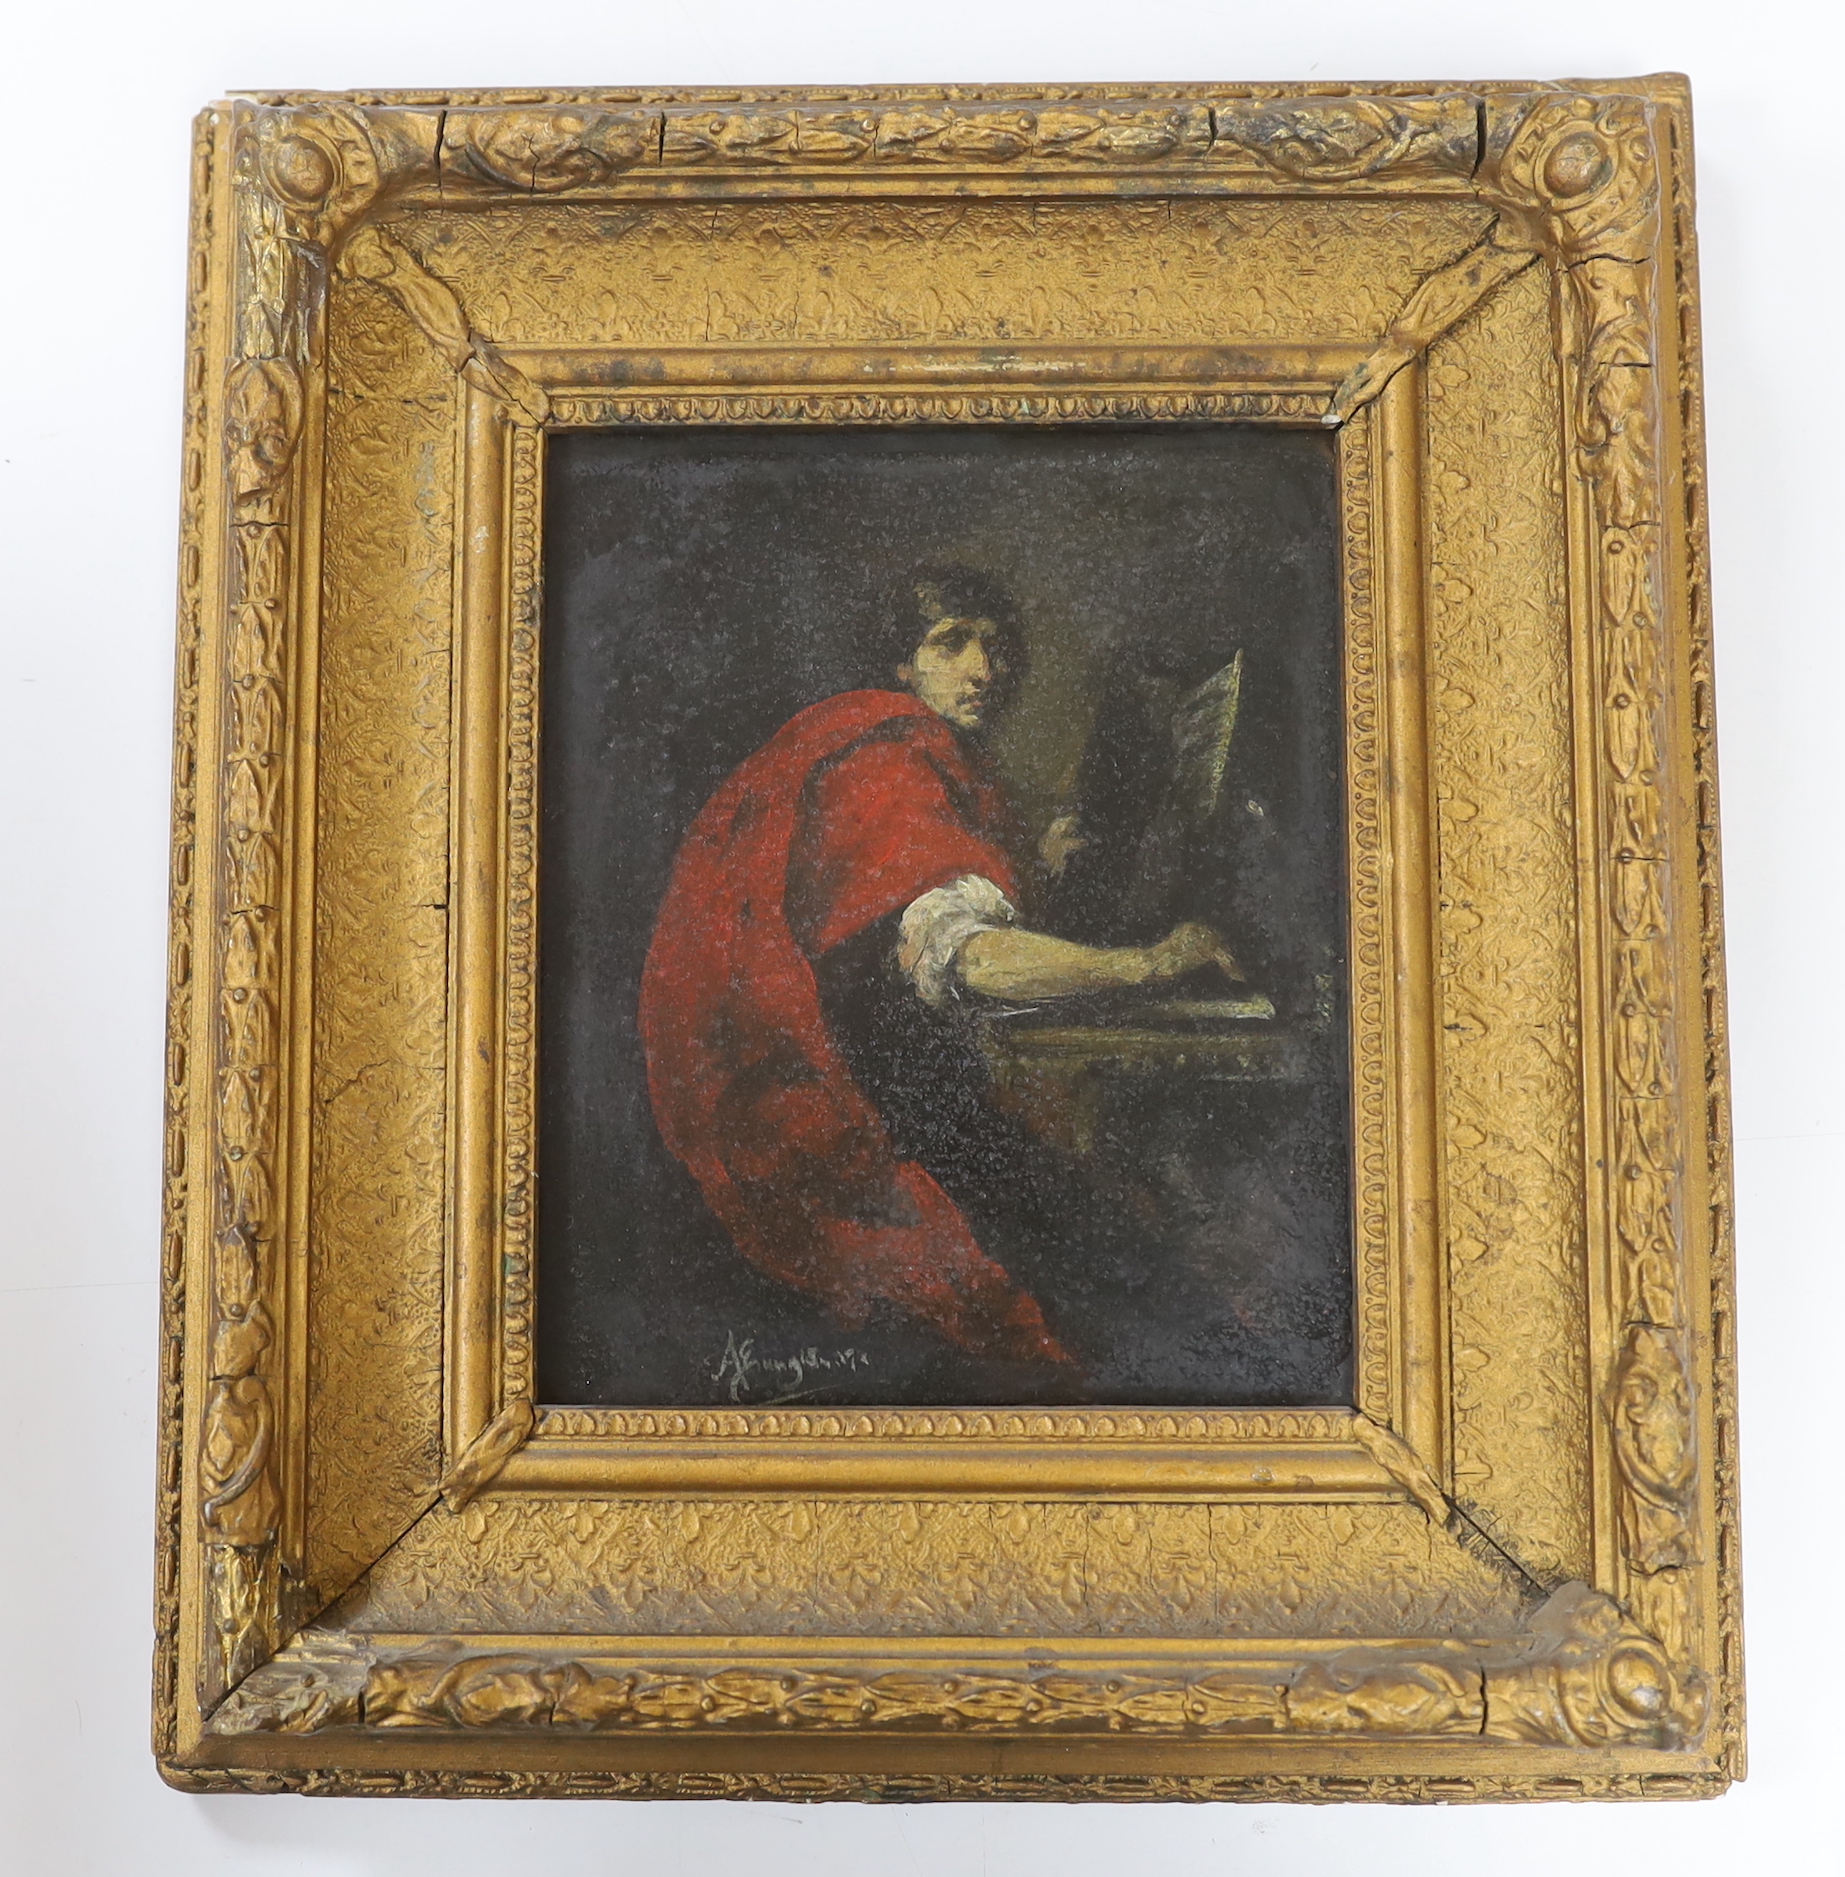 Late 19th century oil on board, Portrait of a scholar, indistinctly signed, 22 x 18cm, ornate gilt framed